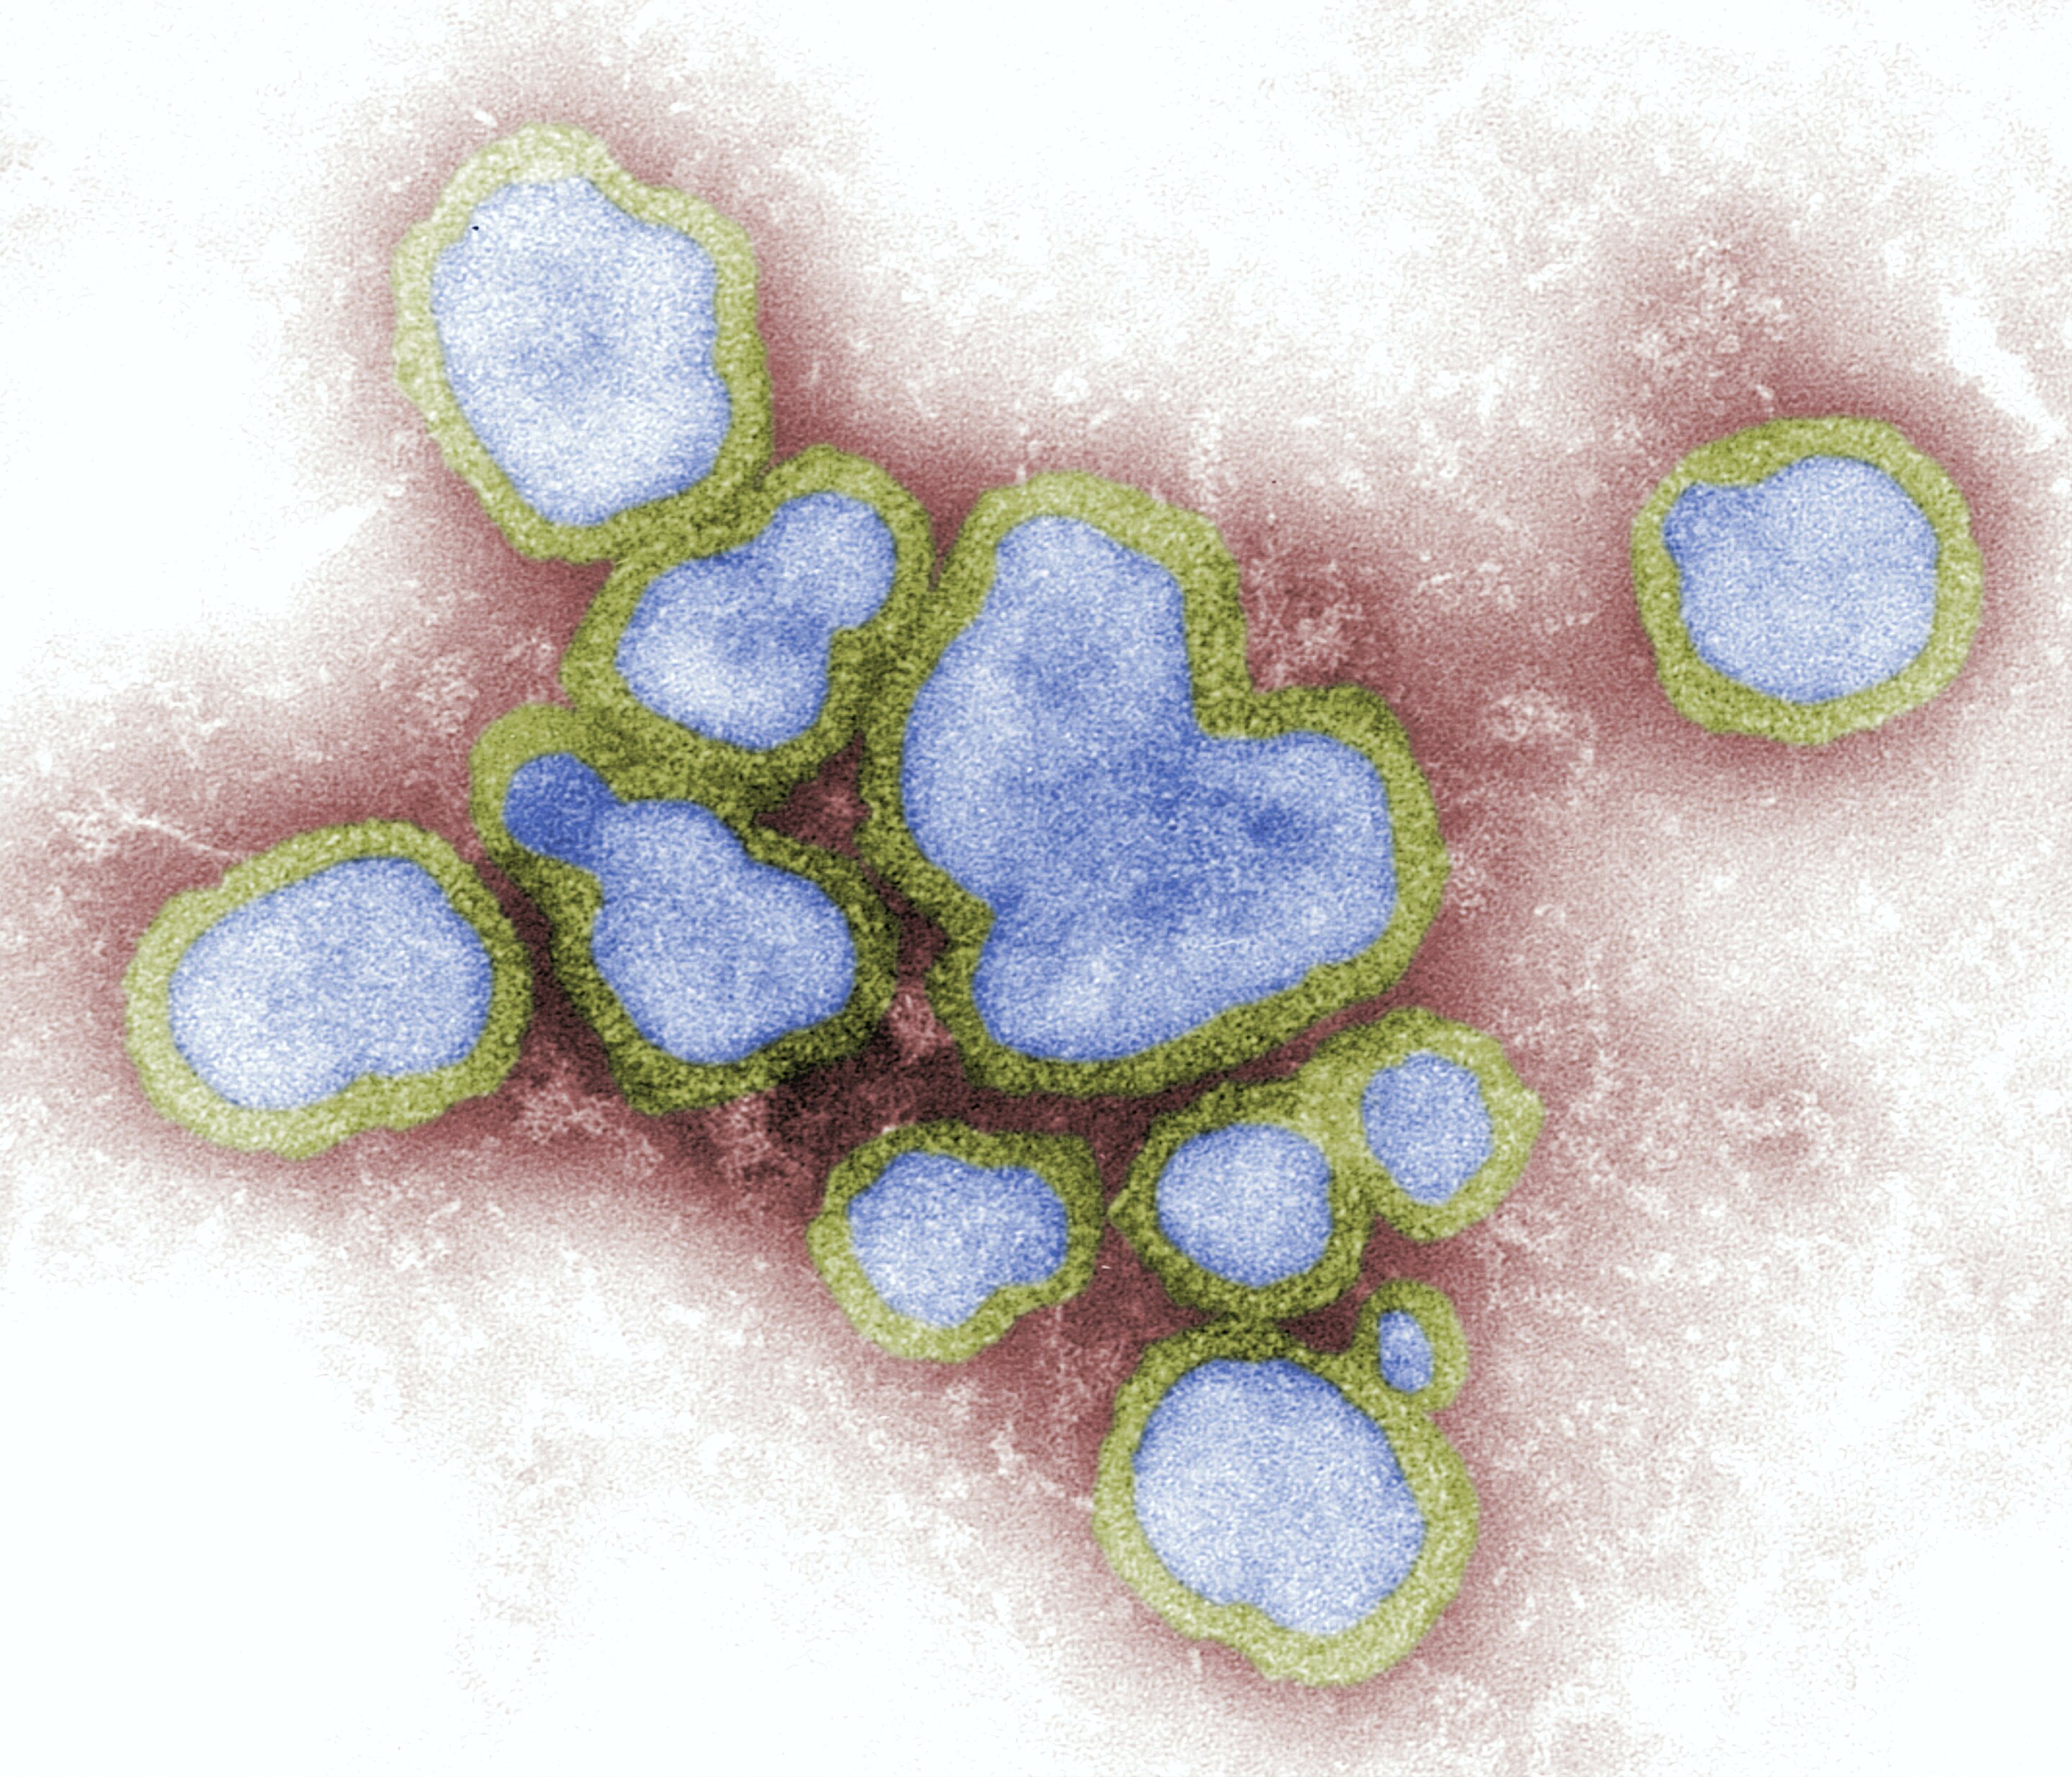 #Study shows experts rate influenza as the number one pathogen of concern of pandemic potential